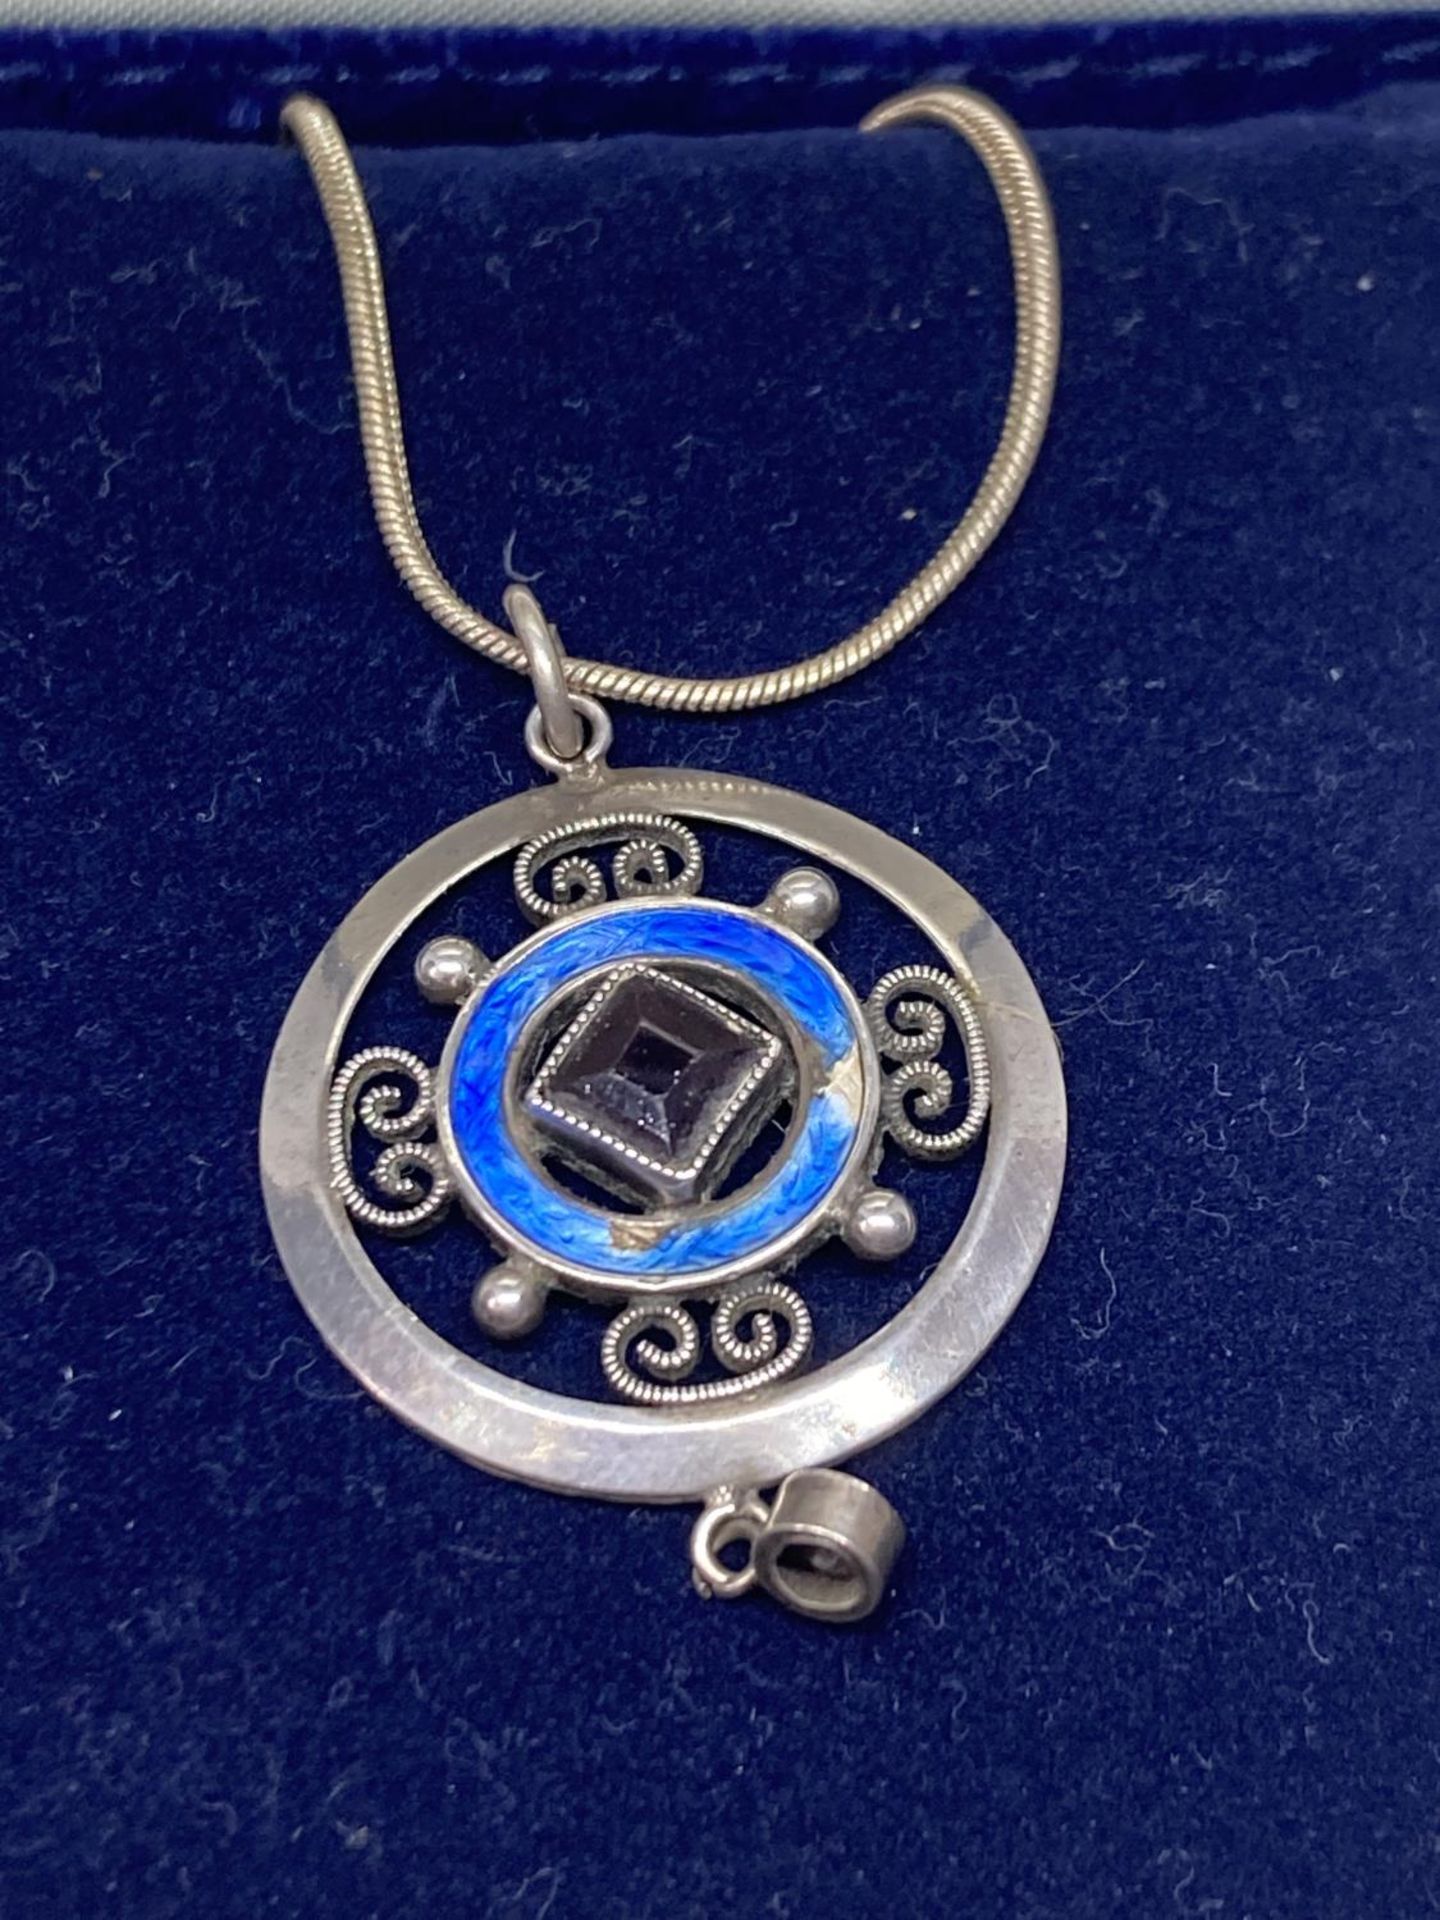 A SILVER AND ENAMEL NECKLACE IN A PRESENTATION BOX - Image 2 of 3